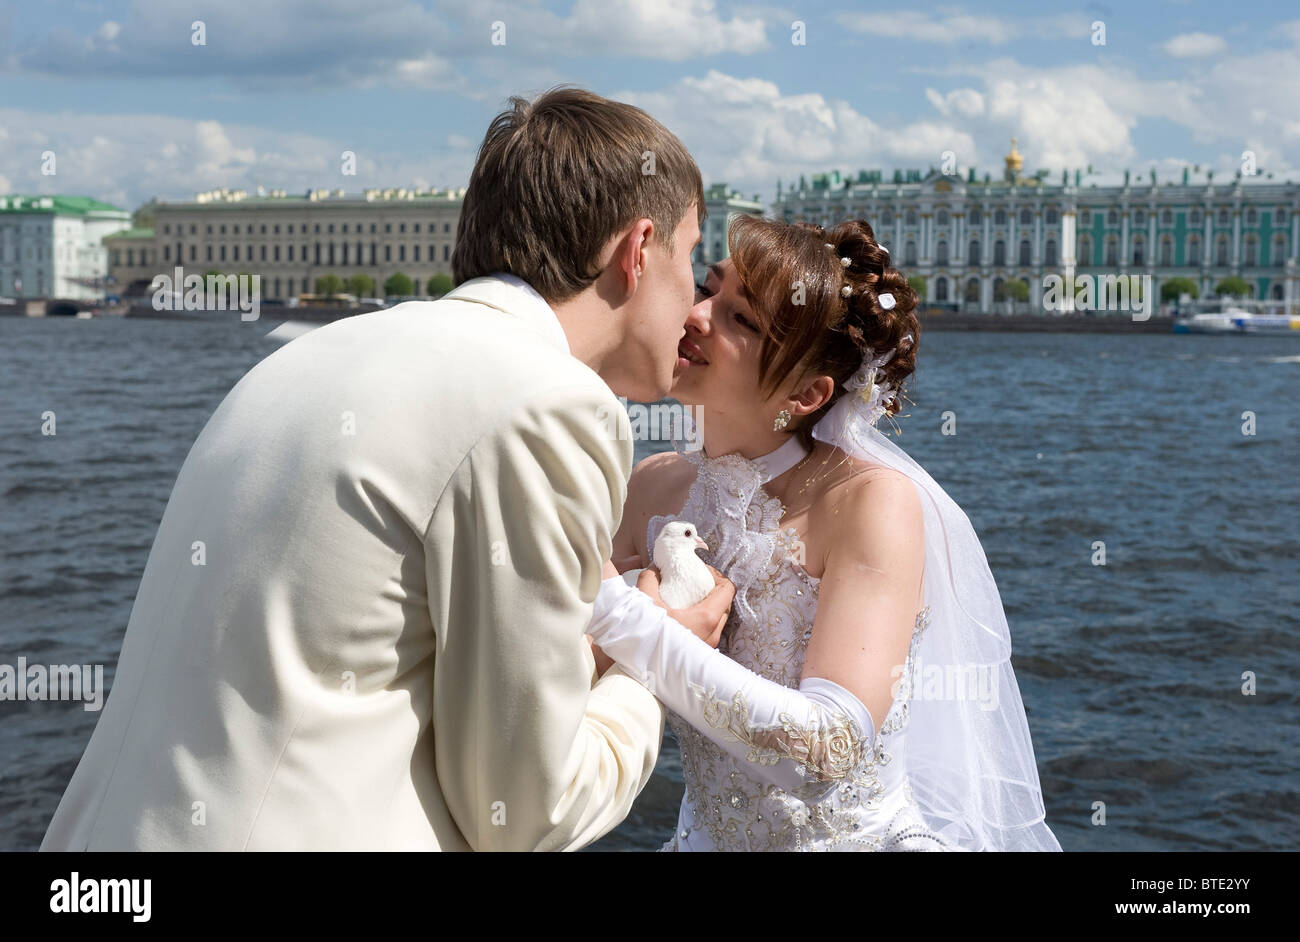 A bridal couple by the Neva River, Saint Petersburg, Russia Stock Photo